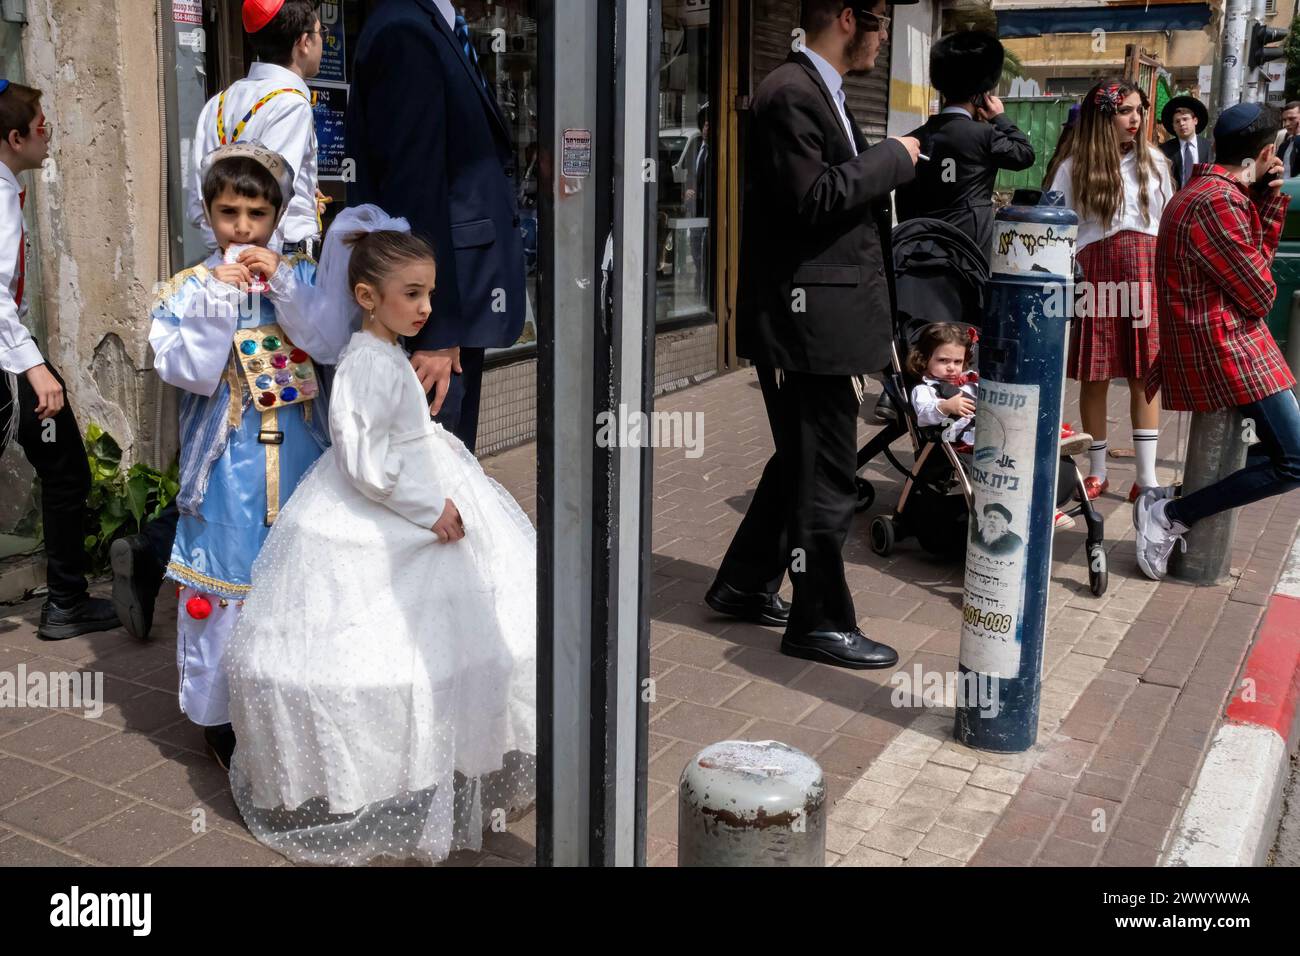 A girl is seen dressed in a white dress as Queen Esther and a boy next to her is dressed as a 'Cohen',  or high priest, according to Jewish Tradition during the Purim celebration. Ultra-Orthodox Jews Celebrate Purim in Bnei Brak, Israel. The holiday commemorates the salvation of the Jews in ancient Persia from a plot to annihilate them. A joyous holiday, it is celebrated by both secular and nonsecular Jews, most notably by dressing up in costumes and drinking, according to the Talmud, “until they cannot distinguish between ‘cursed is Haman’ and ‘blessed is Mordechai.' Stock Photo